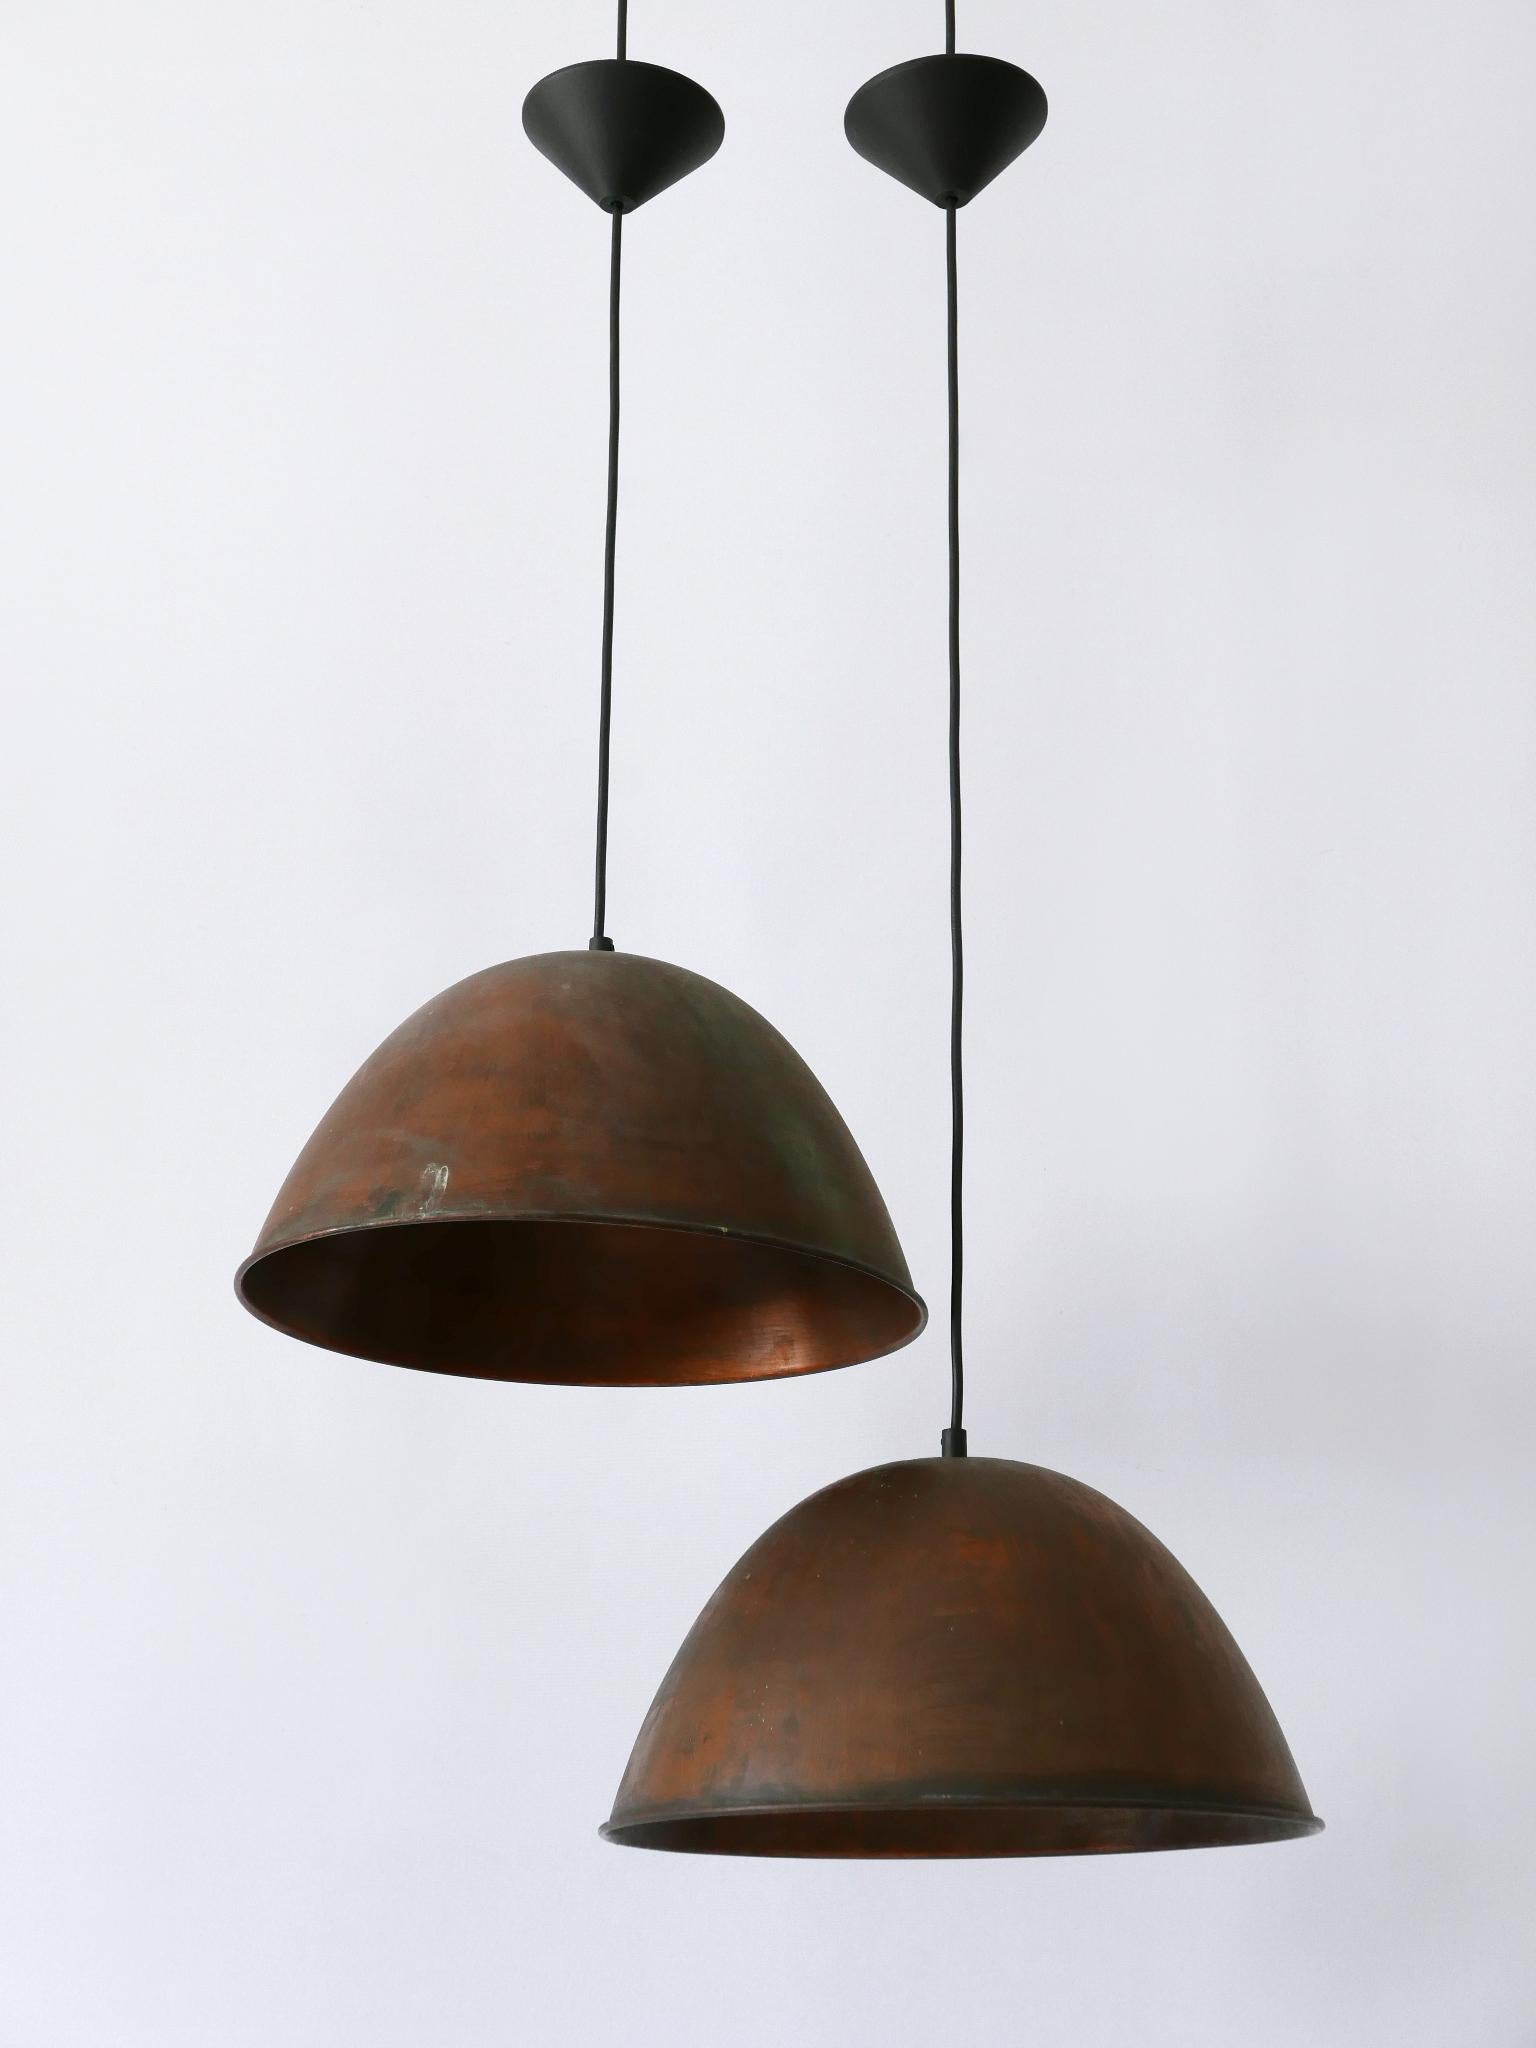 Set of Two Mid-Century Modern Copper Pendant Lamps or Hanging Lights 1950s For Sale 4